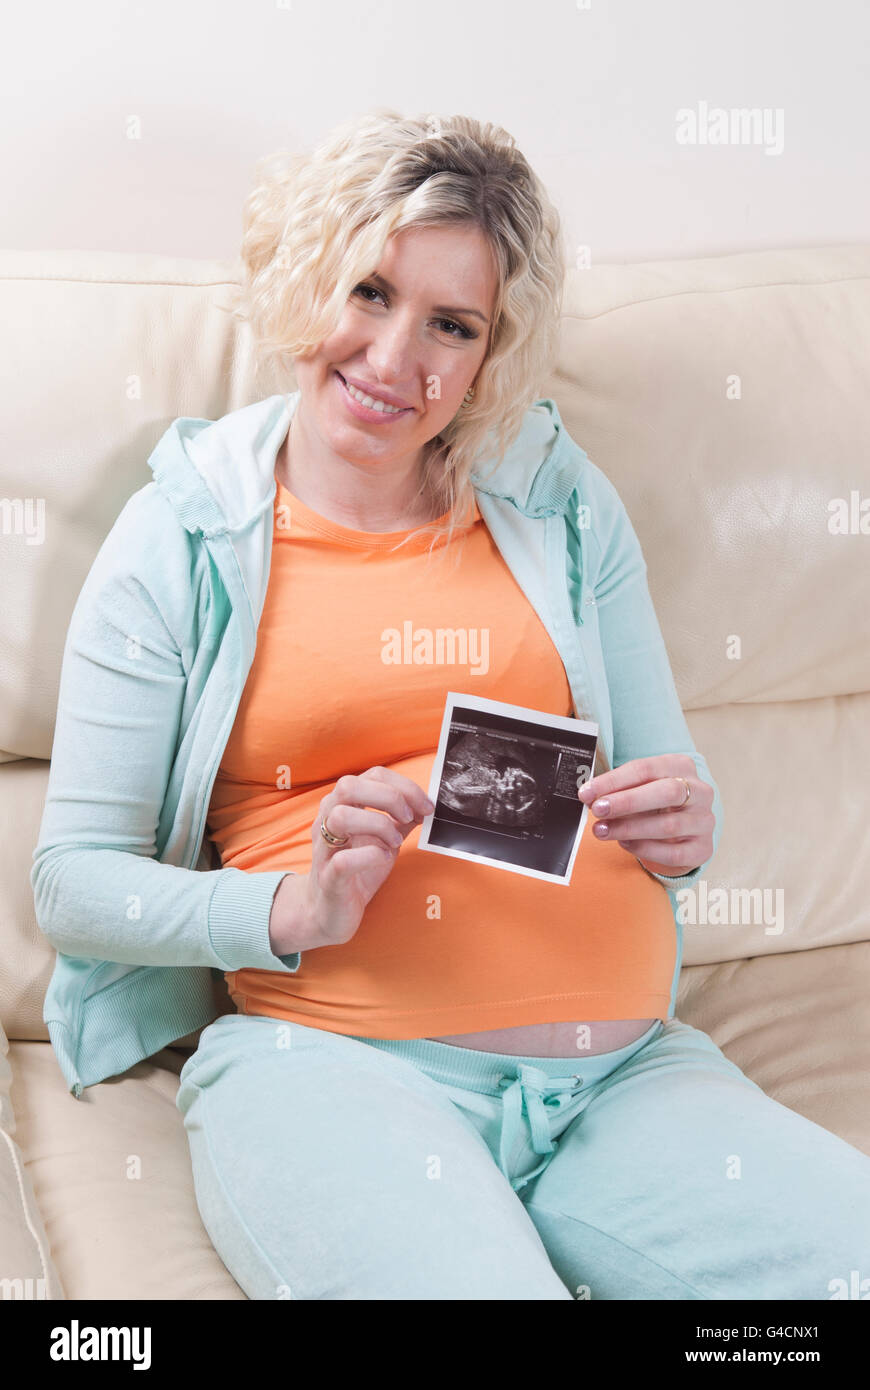 Pregnant woman holding a scan photo of her baby Stock Photo